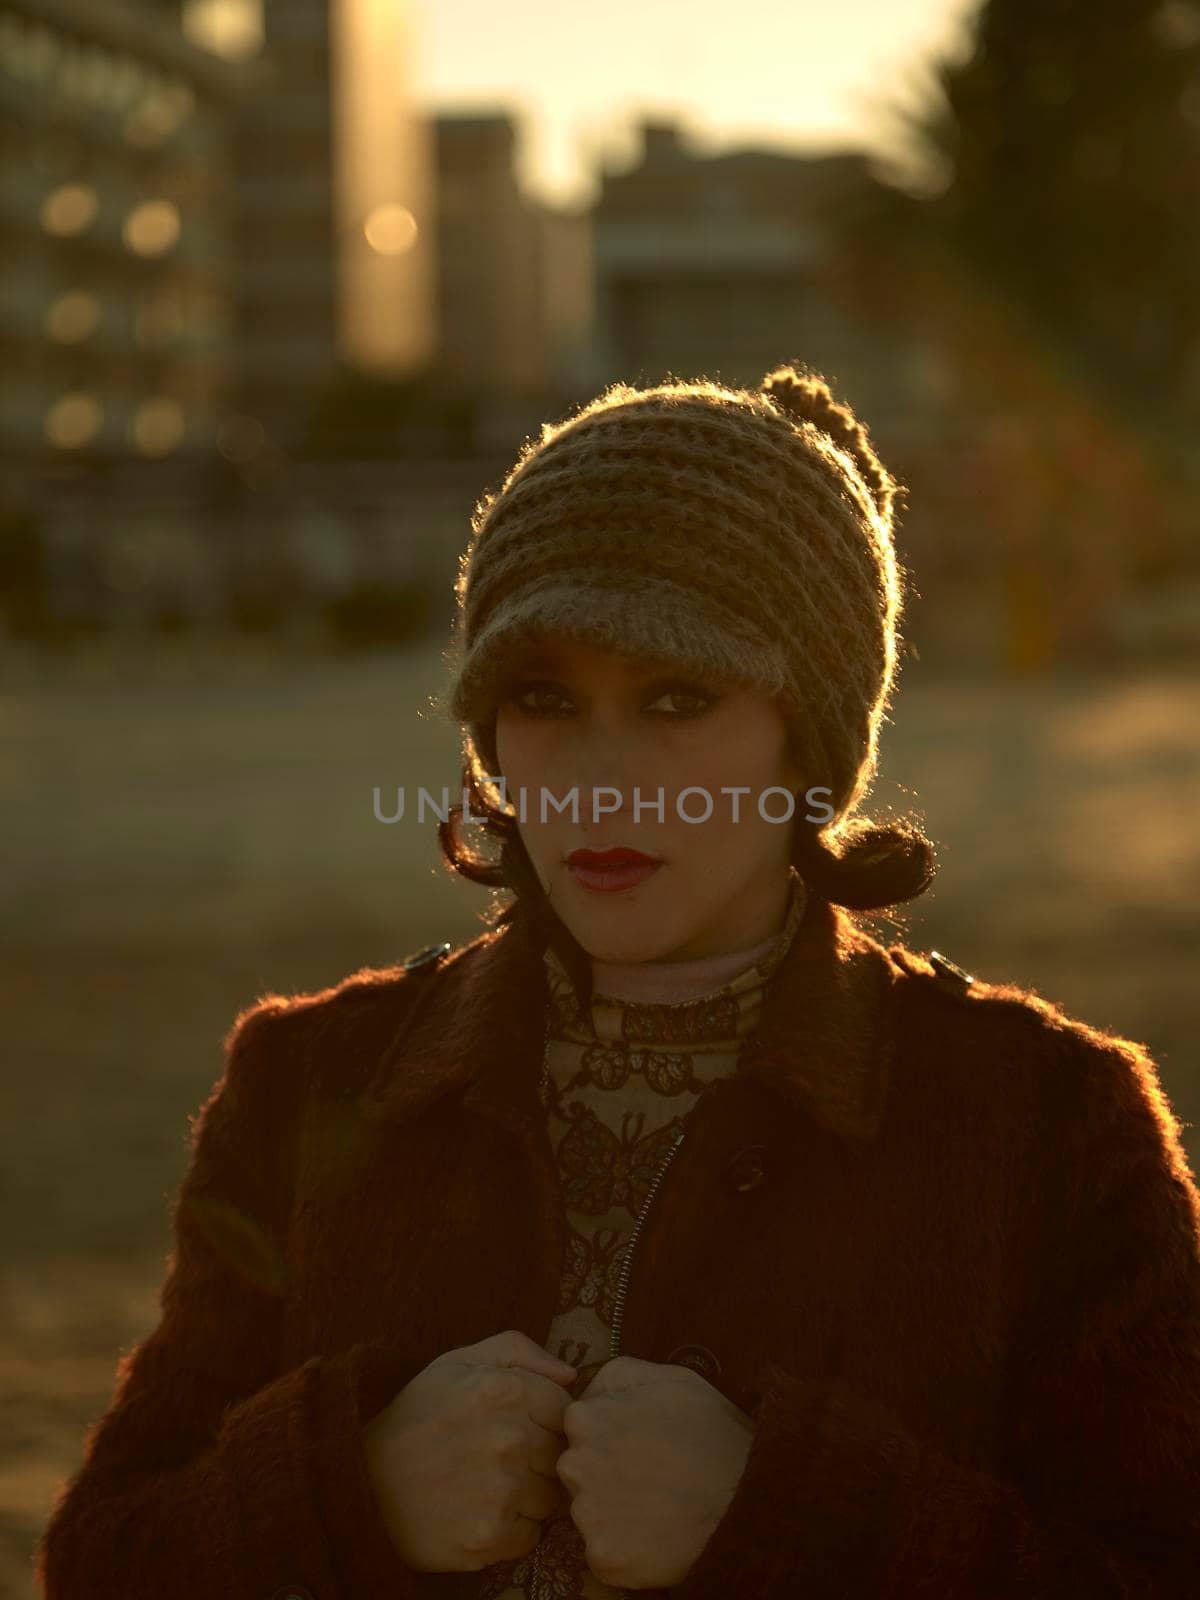 Beautiful young woman portrait, close up outdoor by drmglc